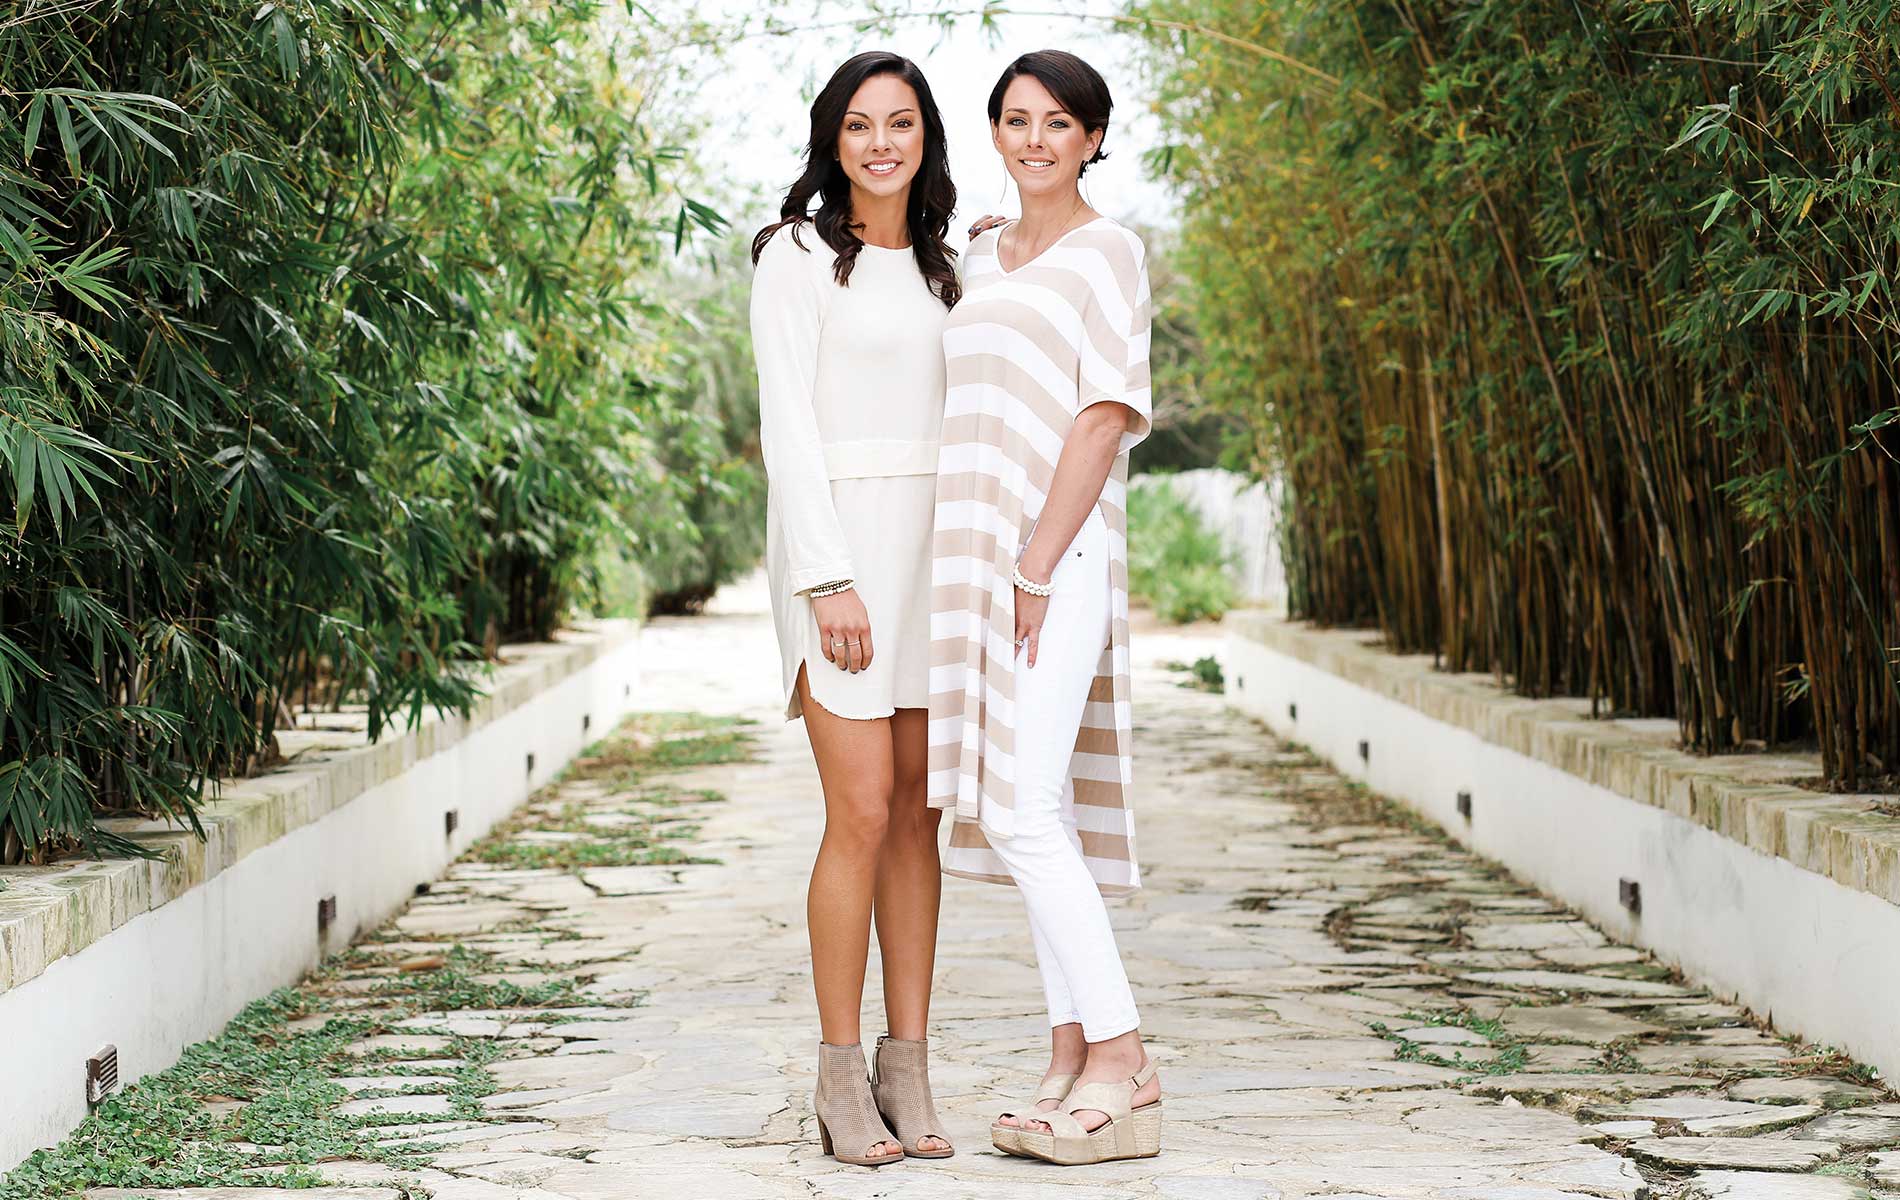 Sisters Katie Steelman and Abbie Boatwright, founders and owners of OKO Lifestyle